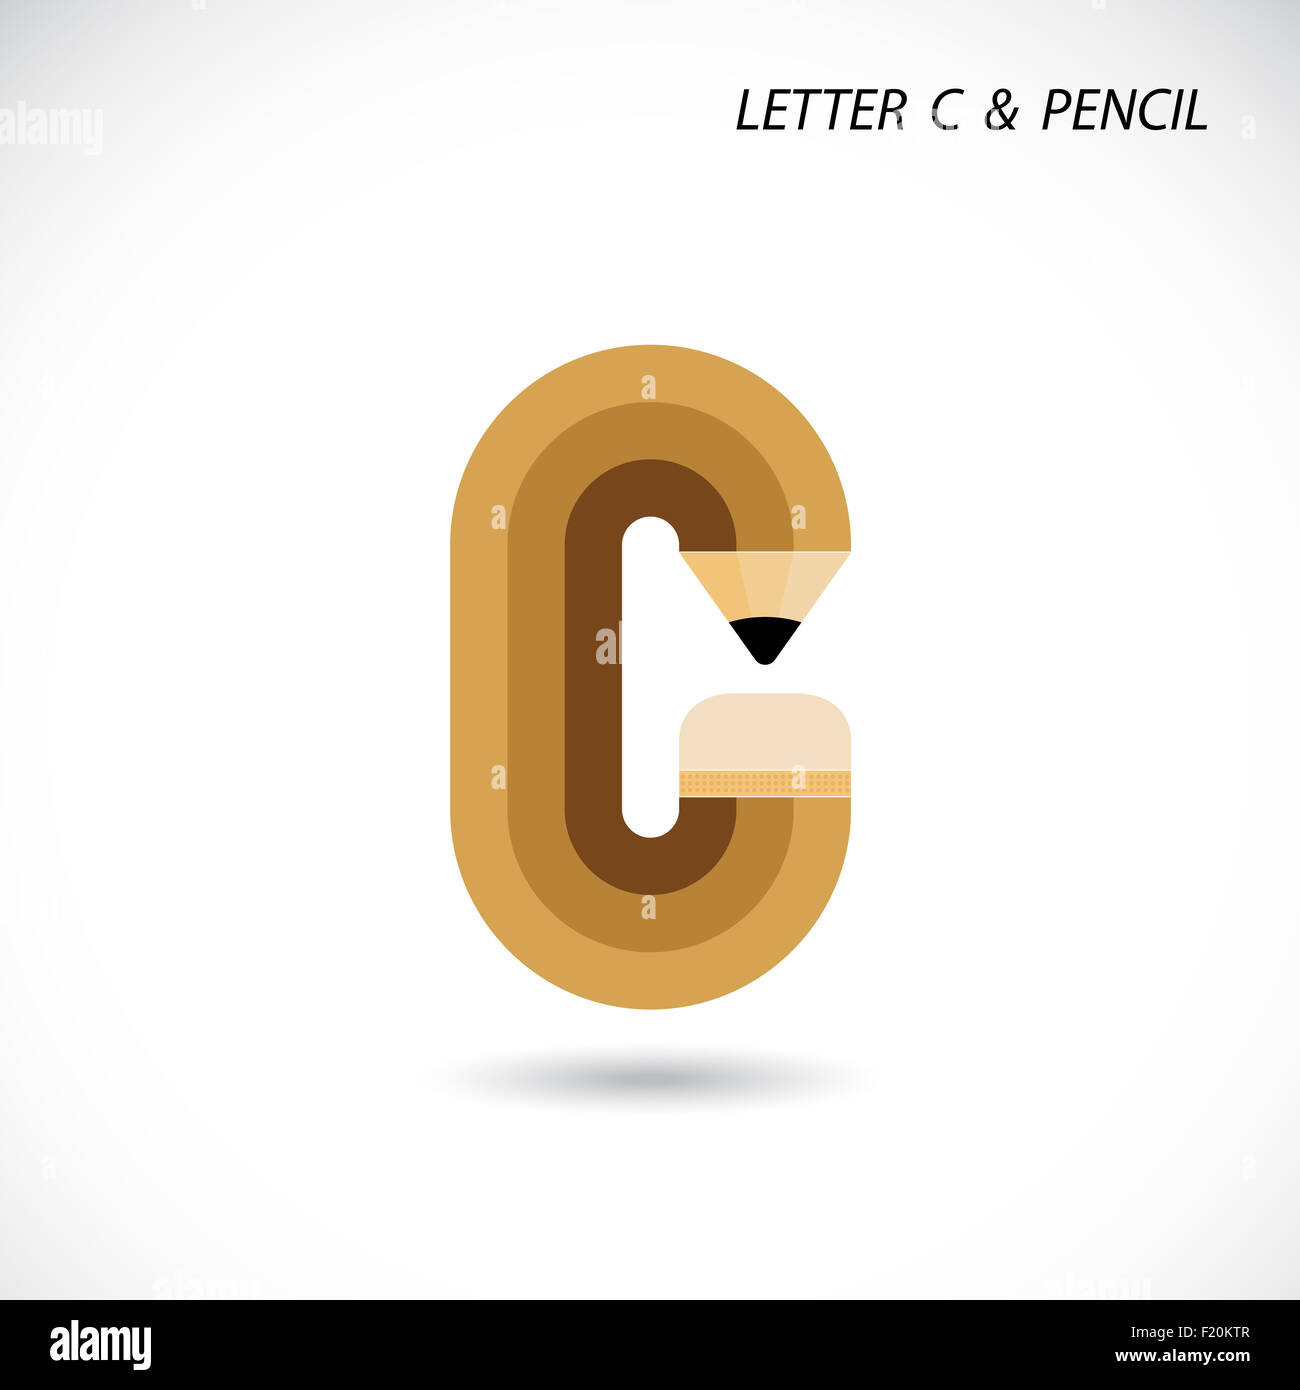 Creative letter C icon abstract logo design  template with pencil symbol. Corporate business creative logotype symbol. Stock Photo